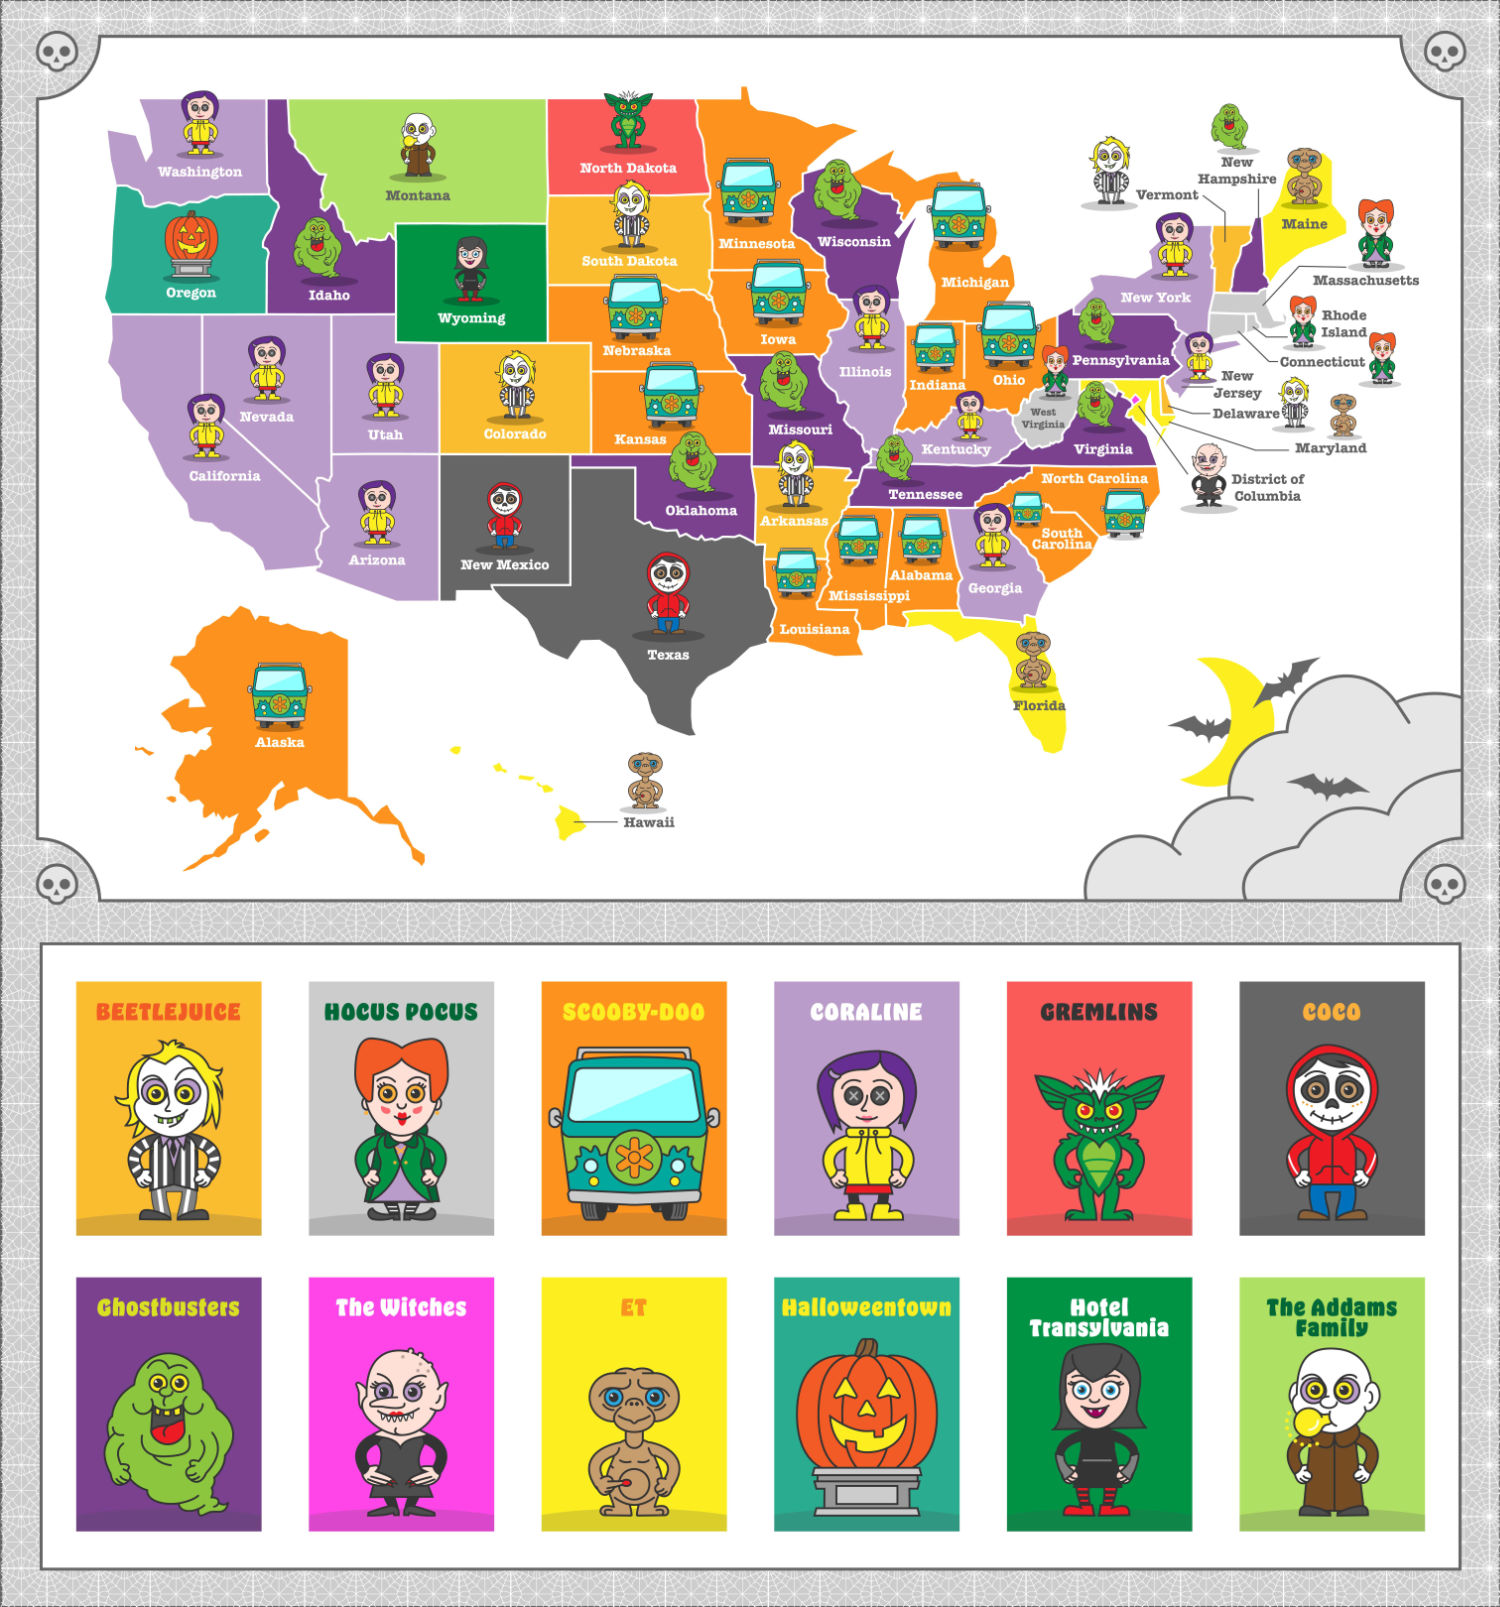 Halloween movies by state